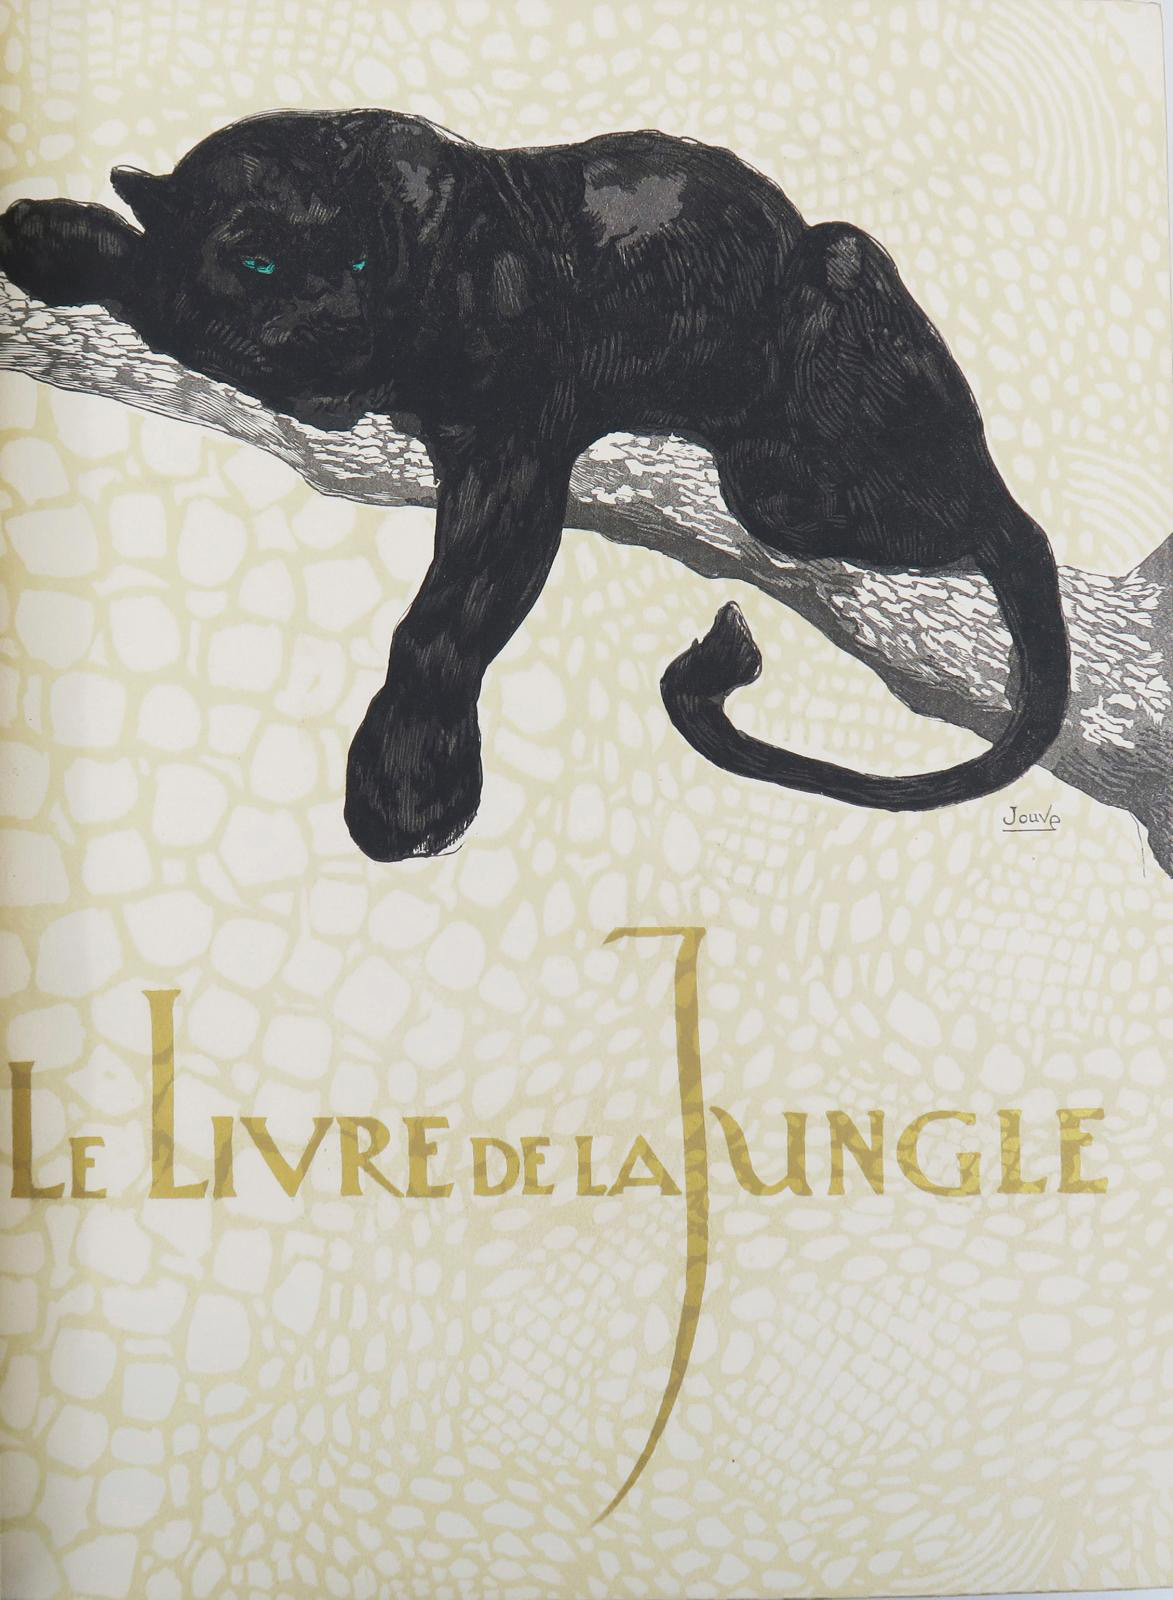 The Jungle Book Illustrated by Paul Jouve: A Bibliophilic Masterpiece